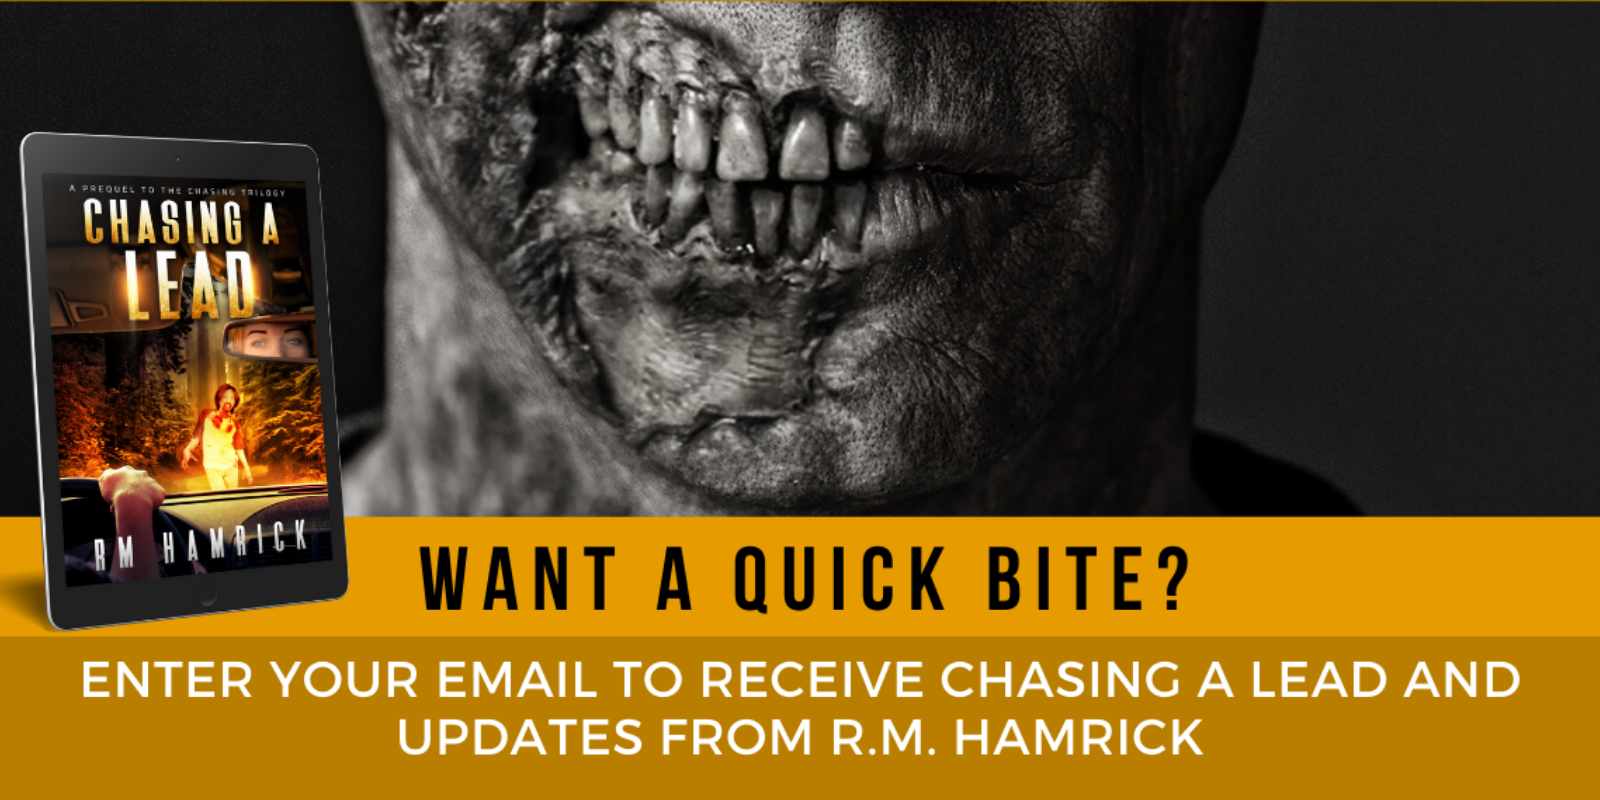 Enter Email to Receive Chasing a Lead and Updates from R.M. Hamrick